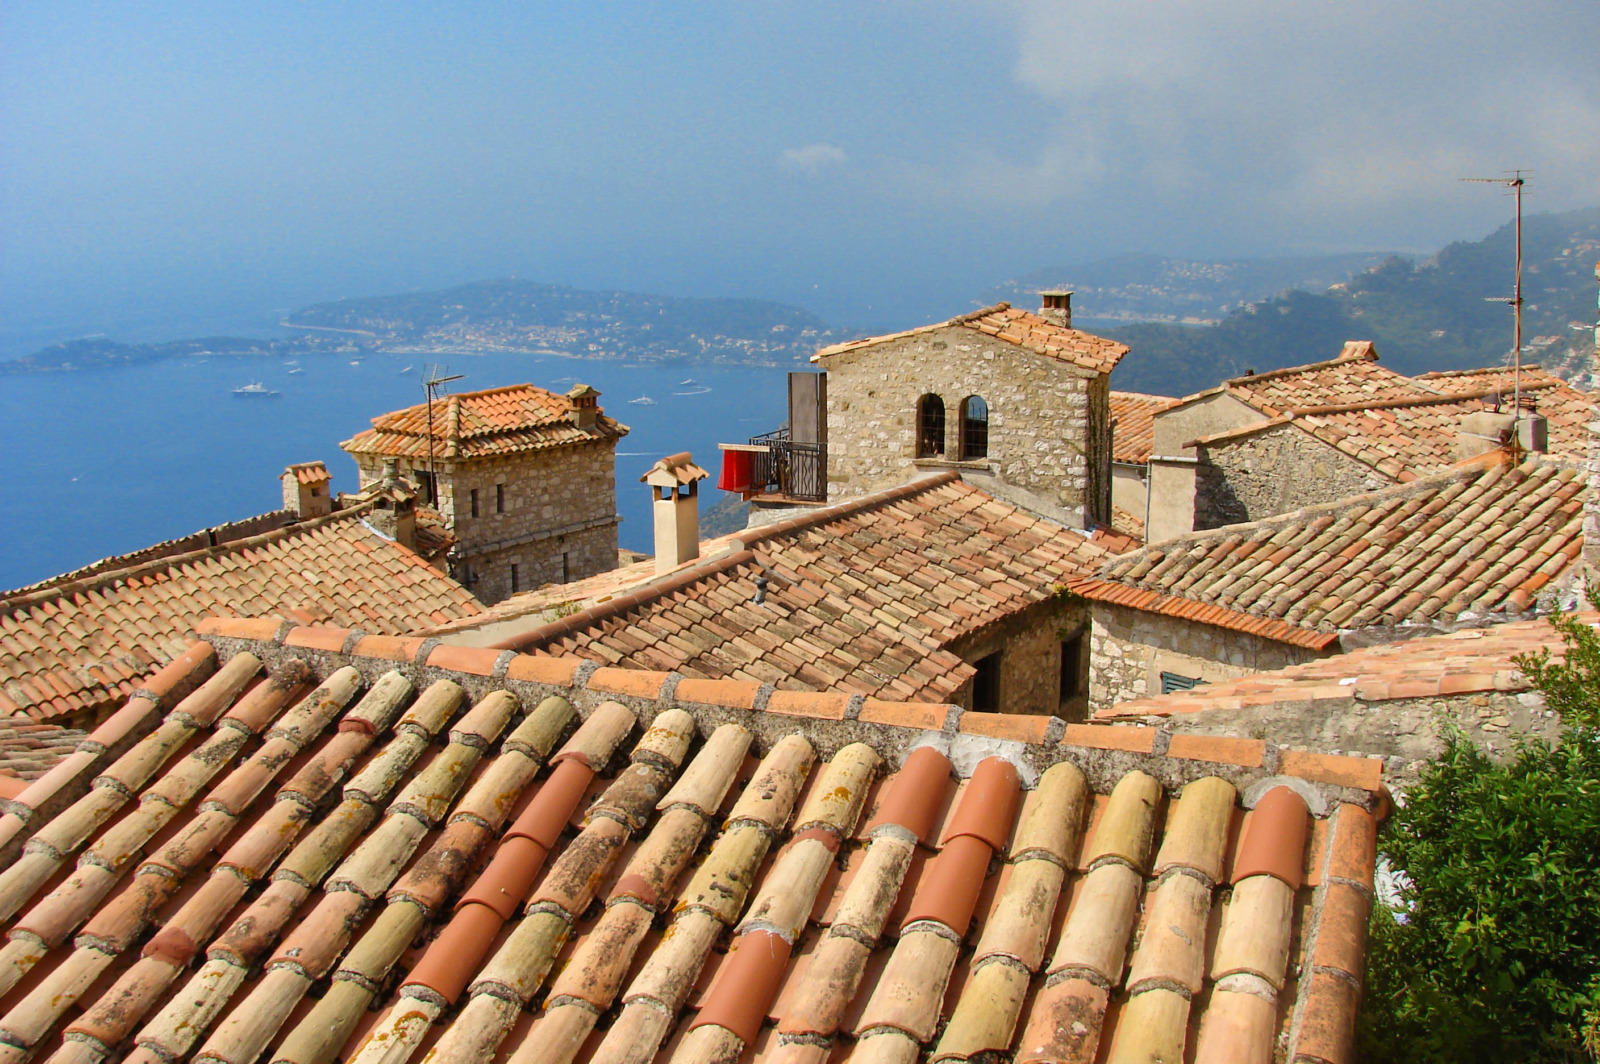 The rooftops of Eze © avu-edm - licence [CC BY 3.0] from Wikimedia Commons